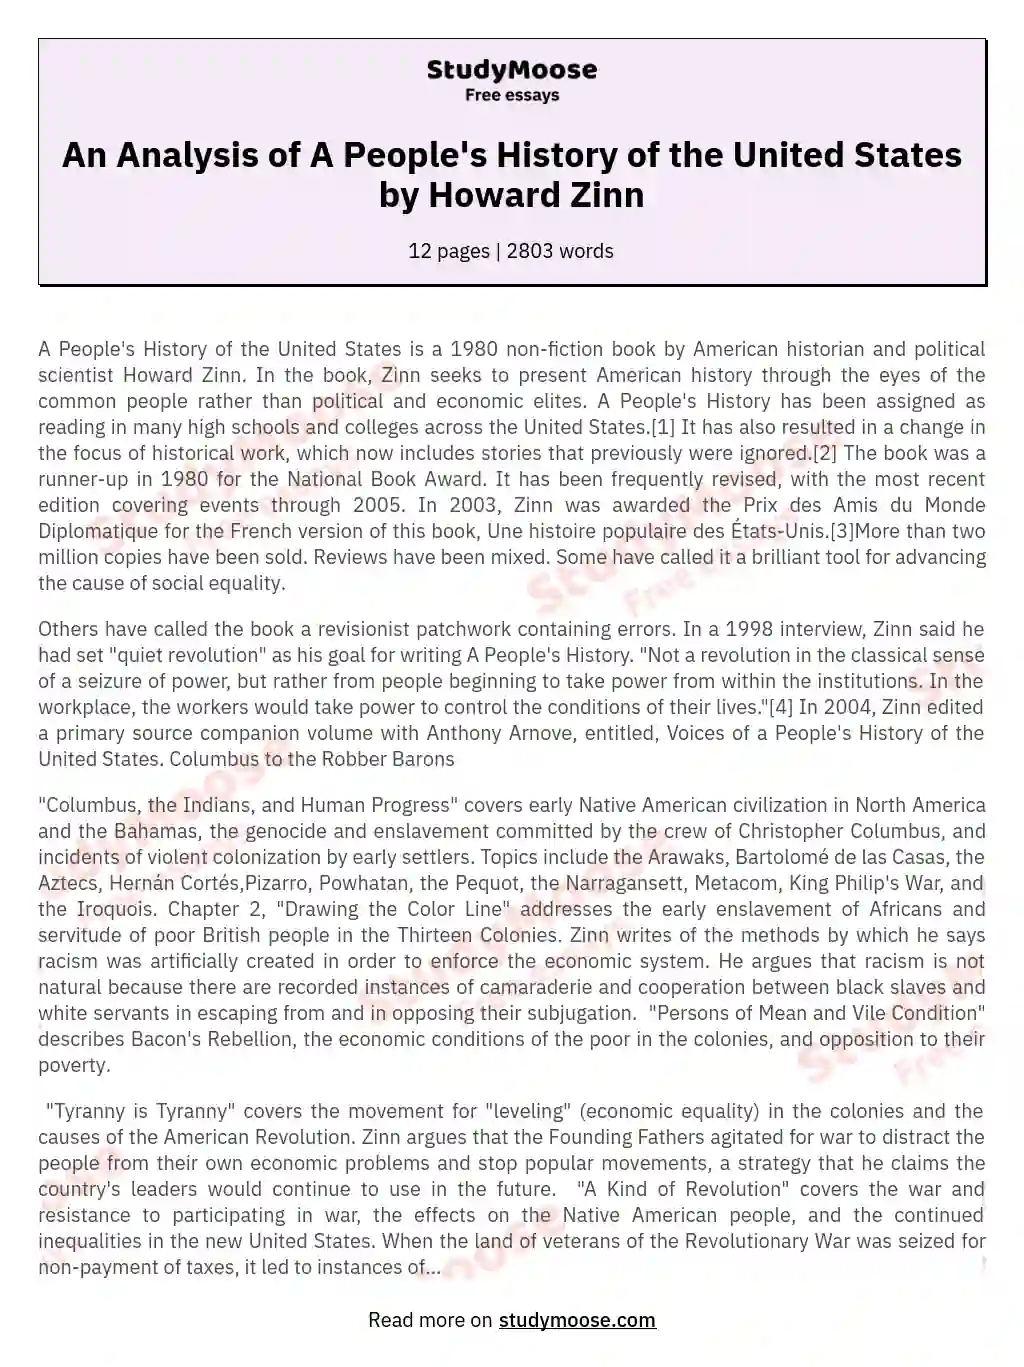 An Analysis of A People's History of the United States by Howard Zinn